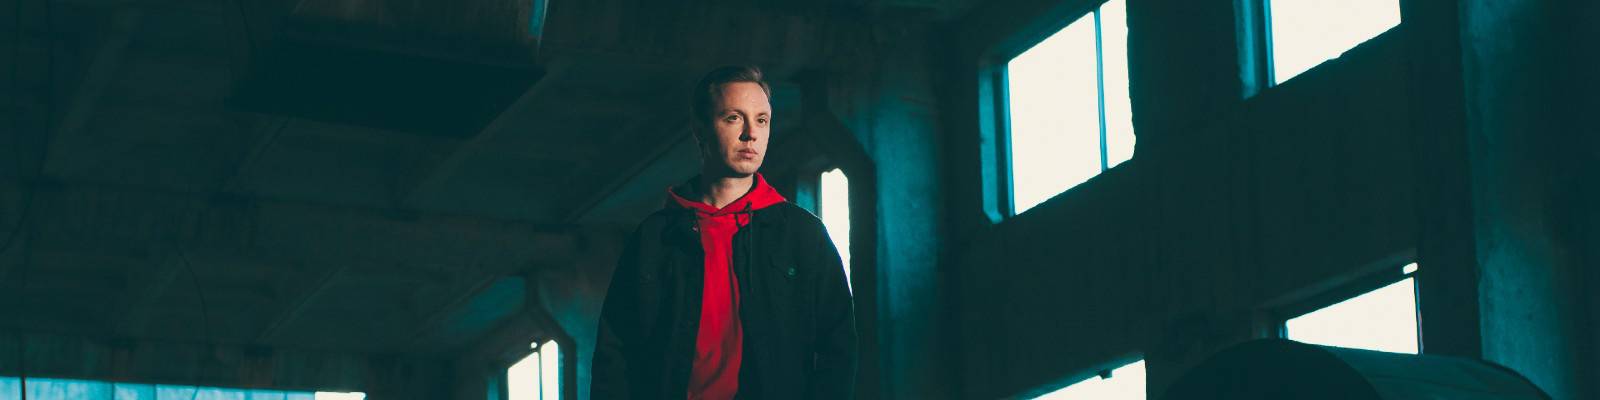 Win exclusive access to Andrew Rayel’s ‘Lifeline’ album listening session + other prizes!